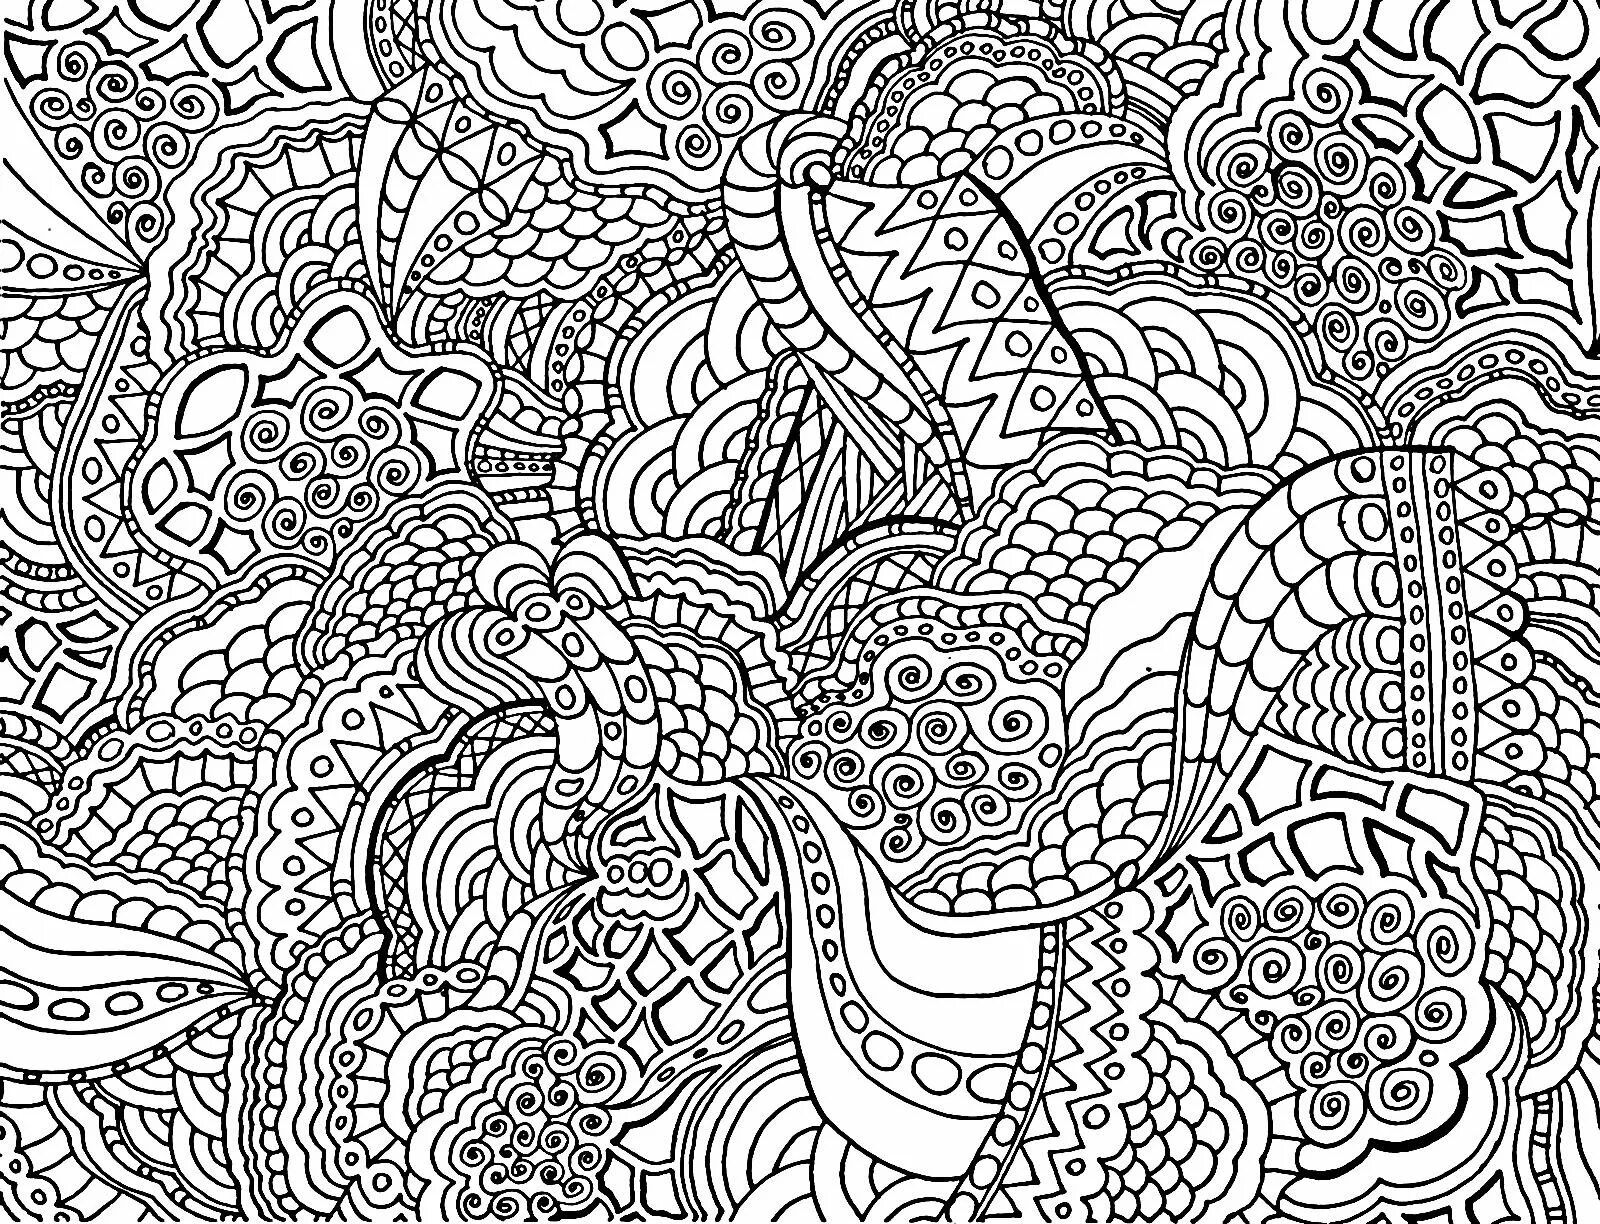 Welcome anti-stress coloring book for adults